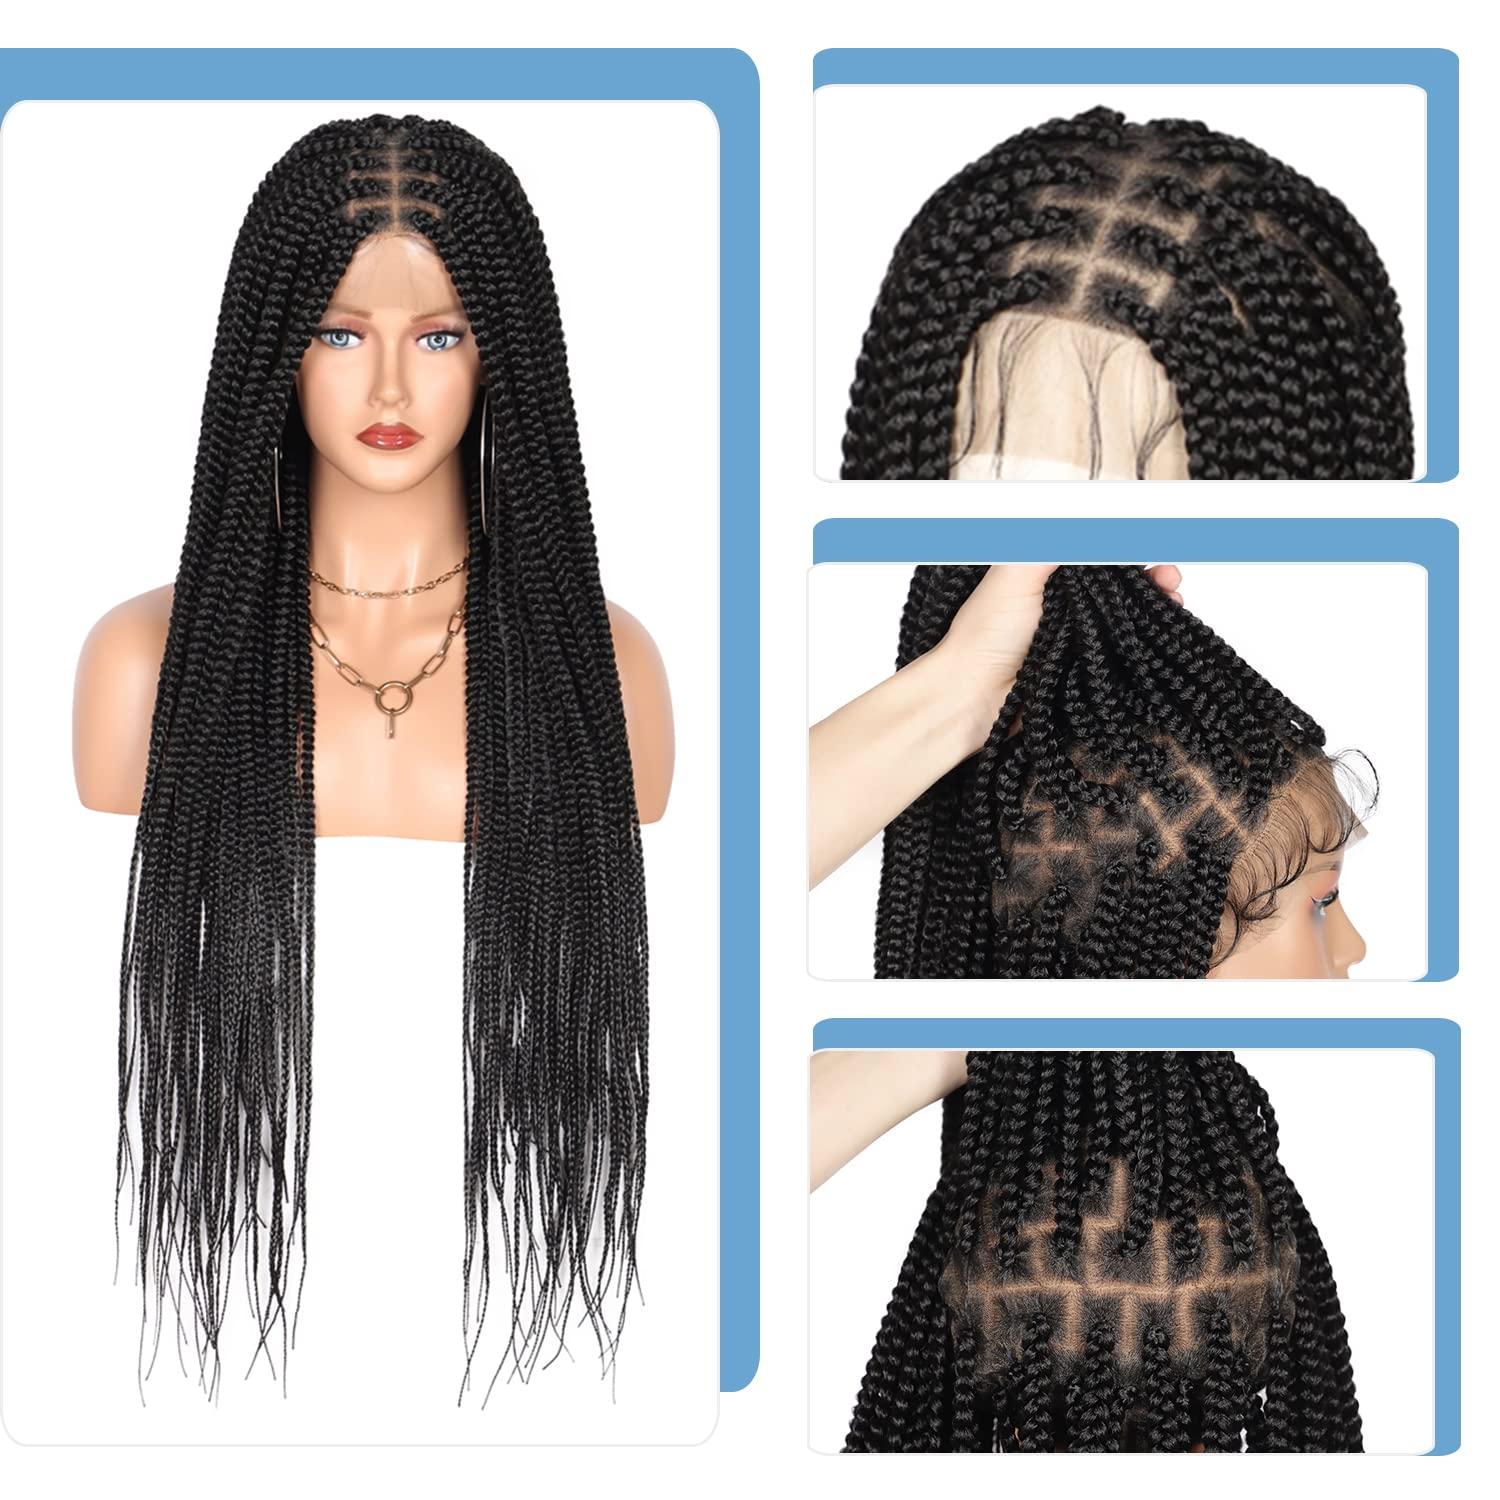 Fecihor 36 Box Braided Wigs Lace Front Knotless Box Braids Lace